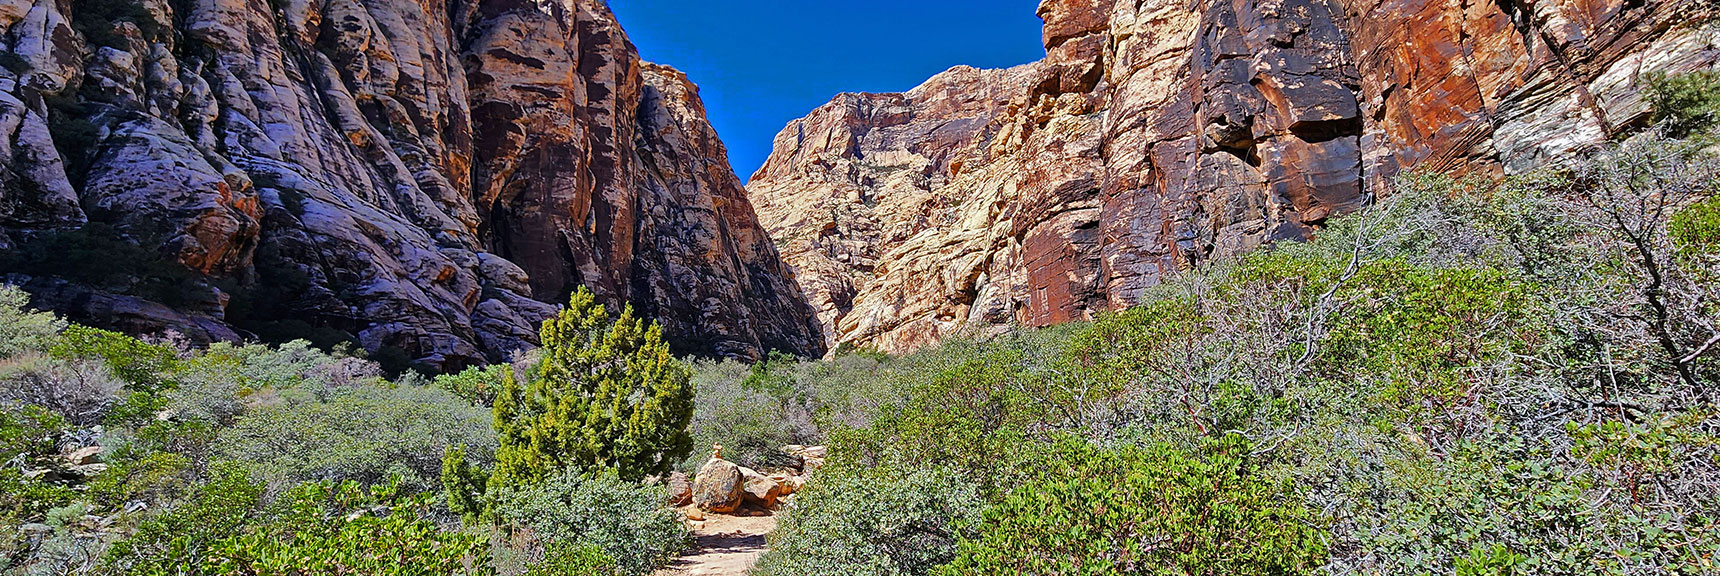 Passing Through Canyon Opening. Trail Narrows, Will Soon Descend to Creek | Ice Box Canyon | Red Rock Canyon NCA, Nevada | Las Vegas Area Trails | David Smith